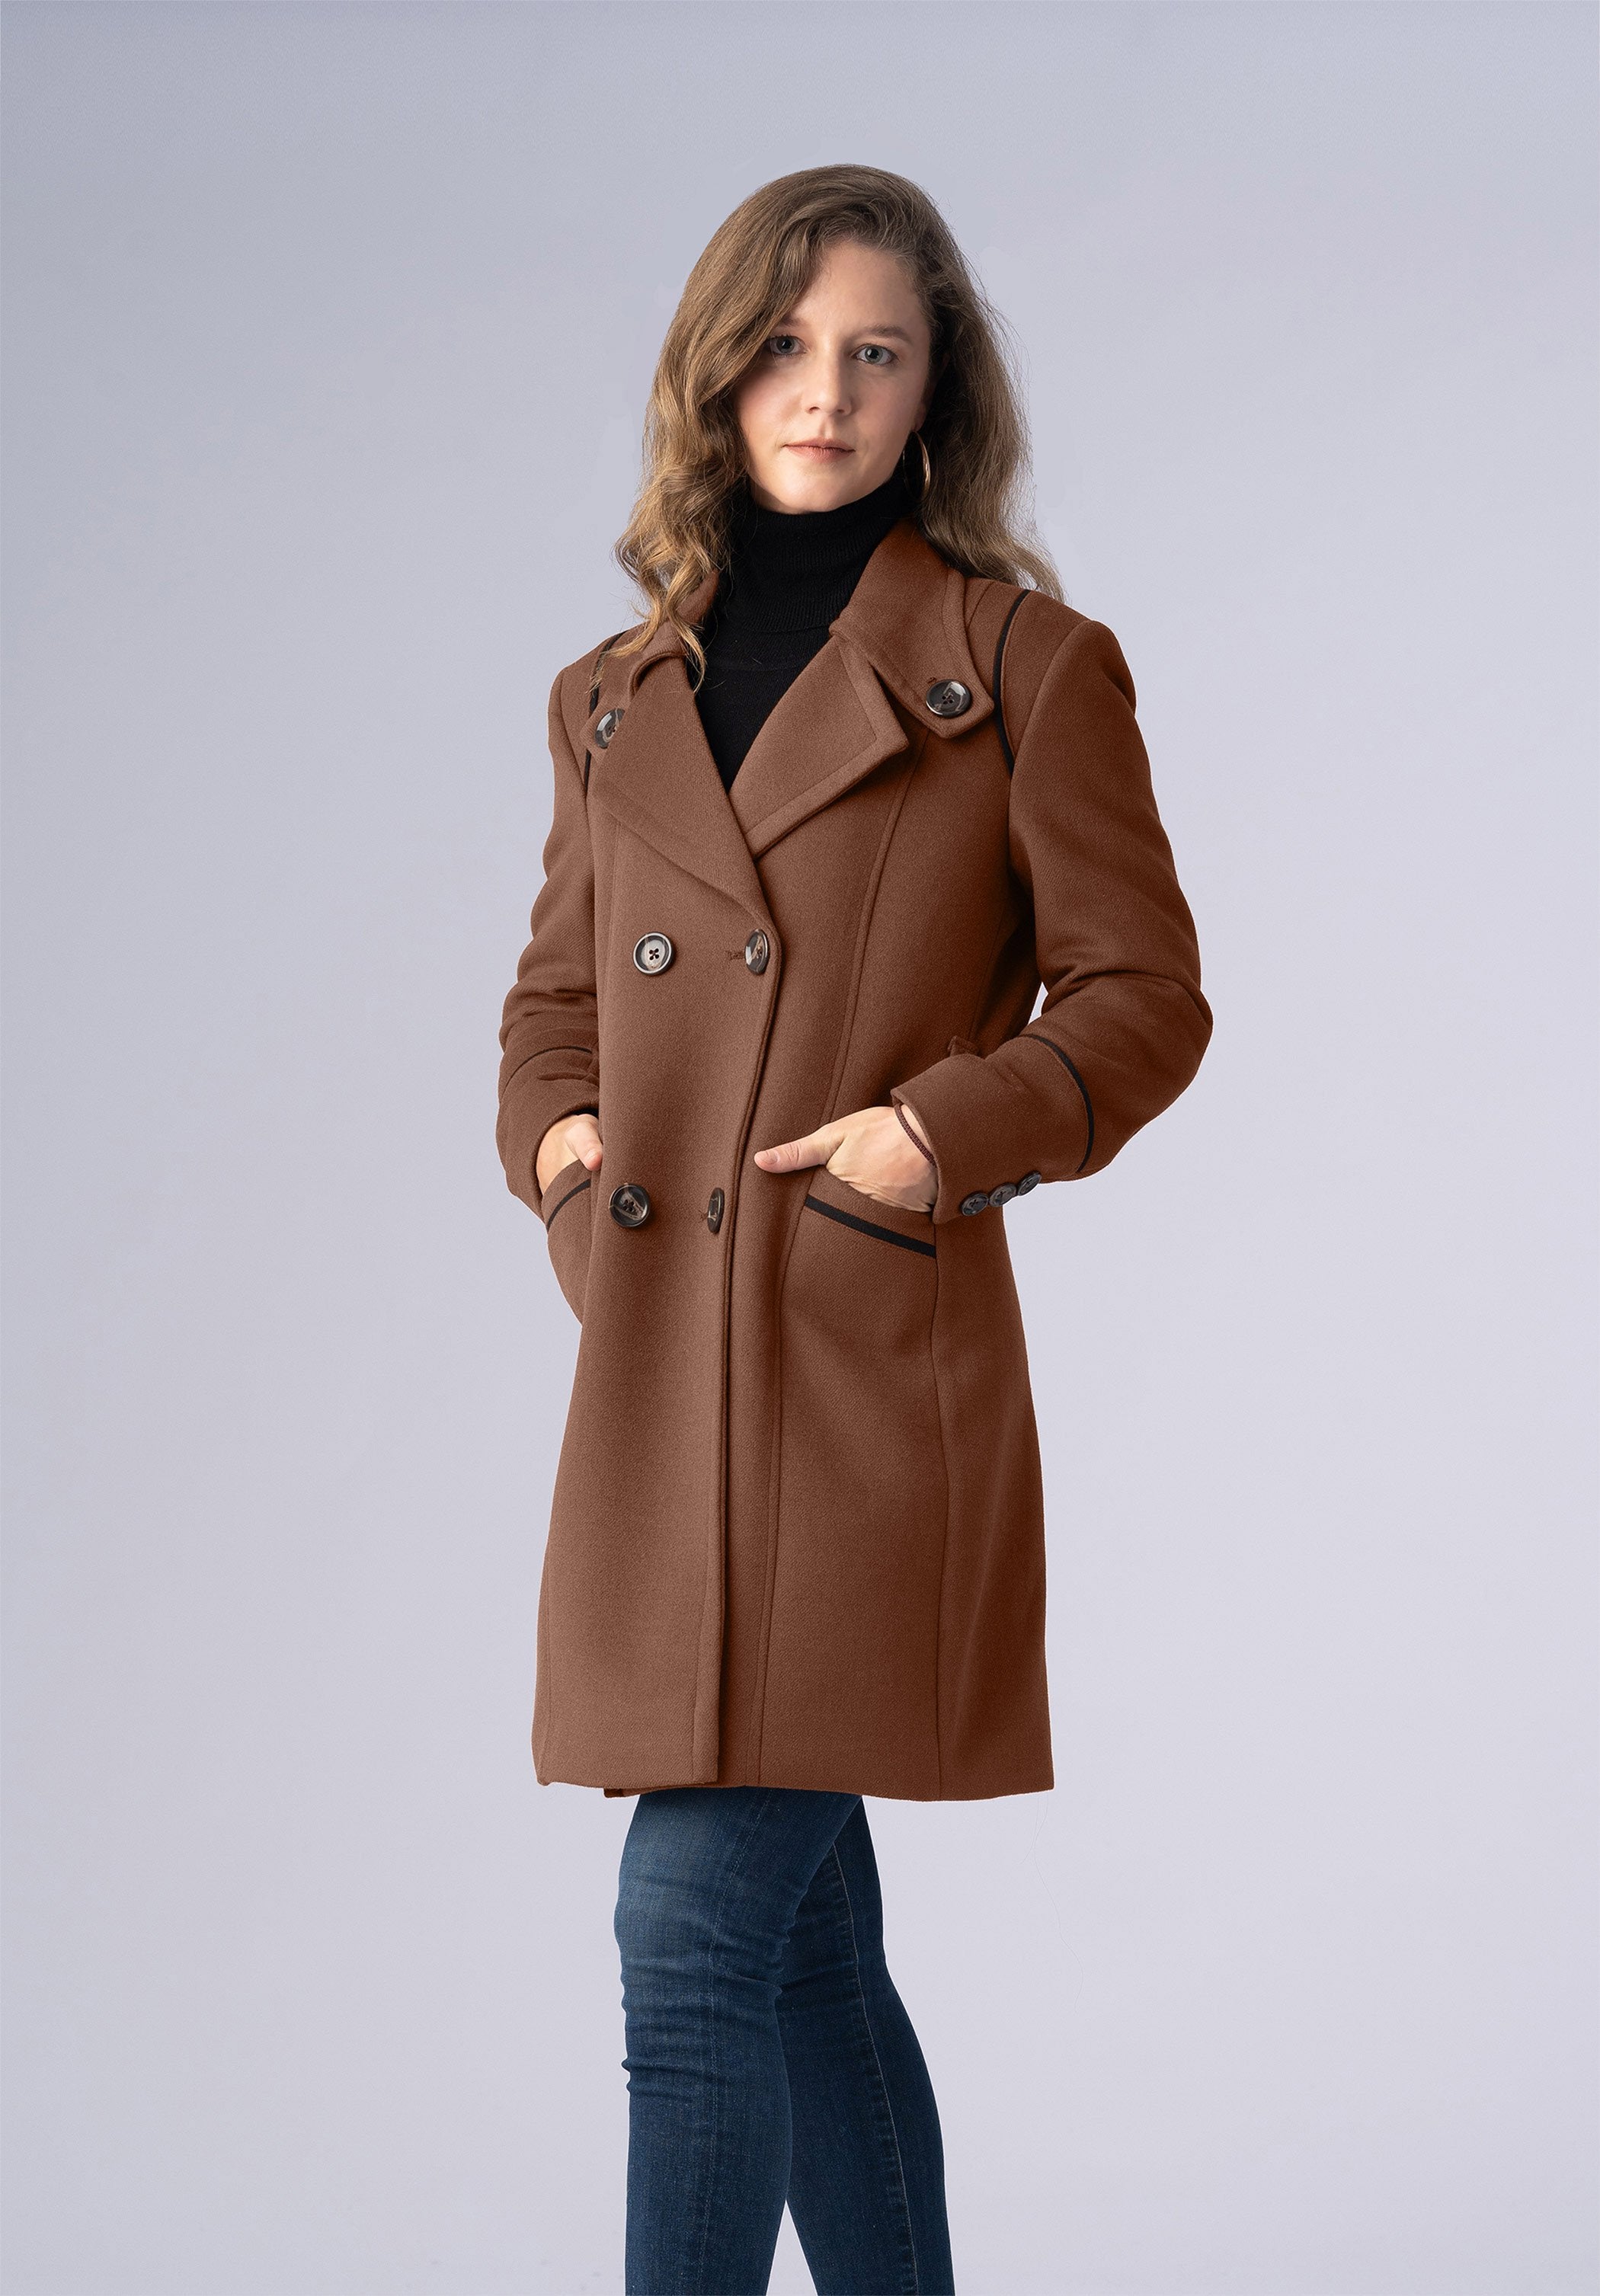 cashmere brown double breasted-coat